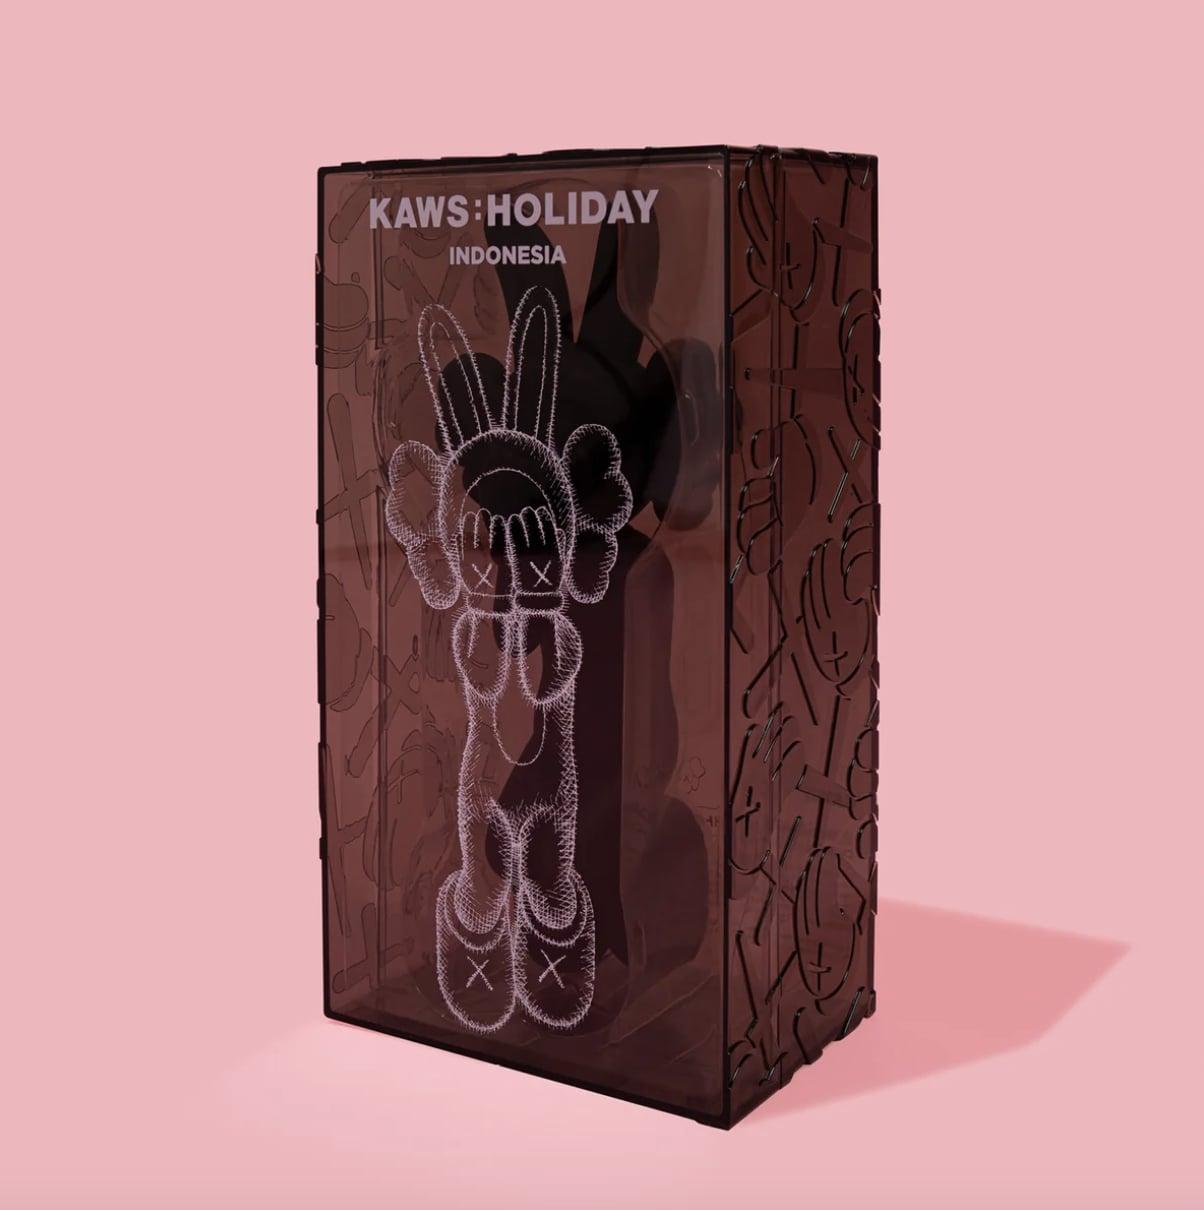 KAWS:HOLIDAY
KAWS:HOLIDAY INDONESIA - Figure (Black)
SPECIFICATION
• Material: Vinyl
• Dimension: L11.5 inches
• Certificated NFC chip of authenticity

For this tenth stop on the tour, @KAWS rejoins long-time collaborator @ARR.AllRightsReserved,